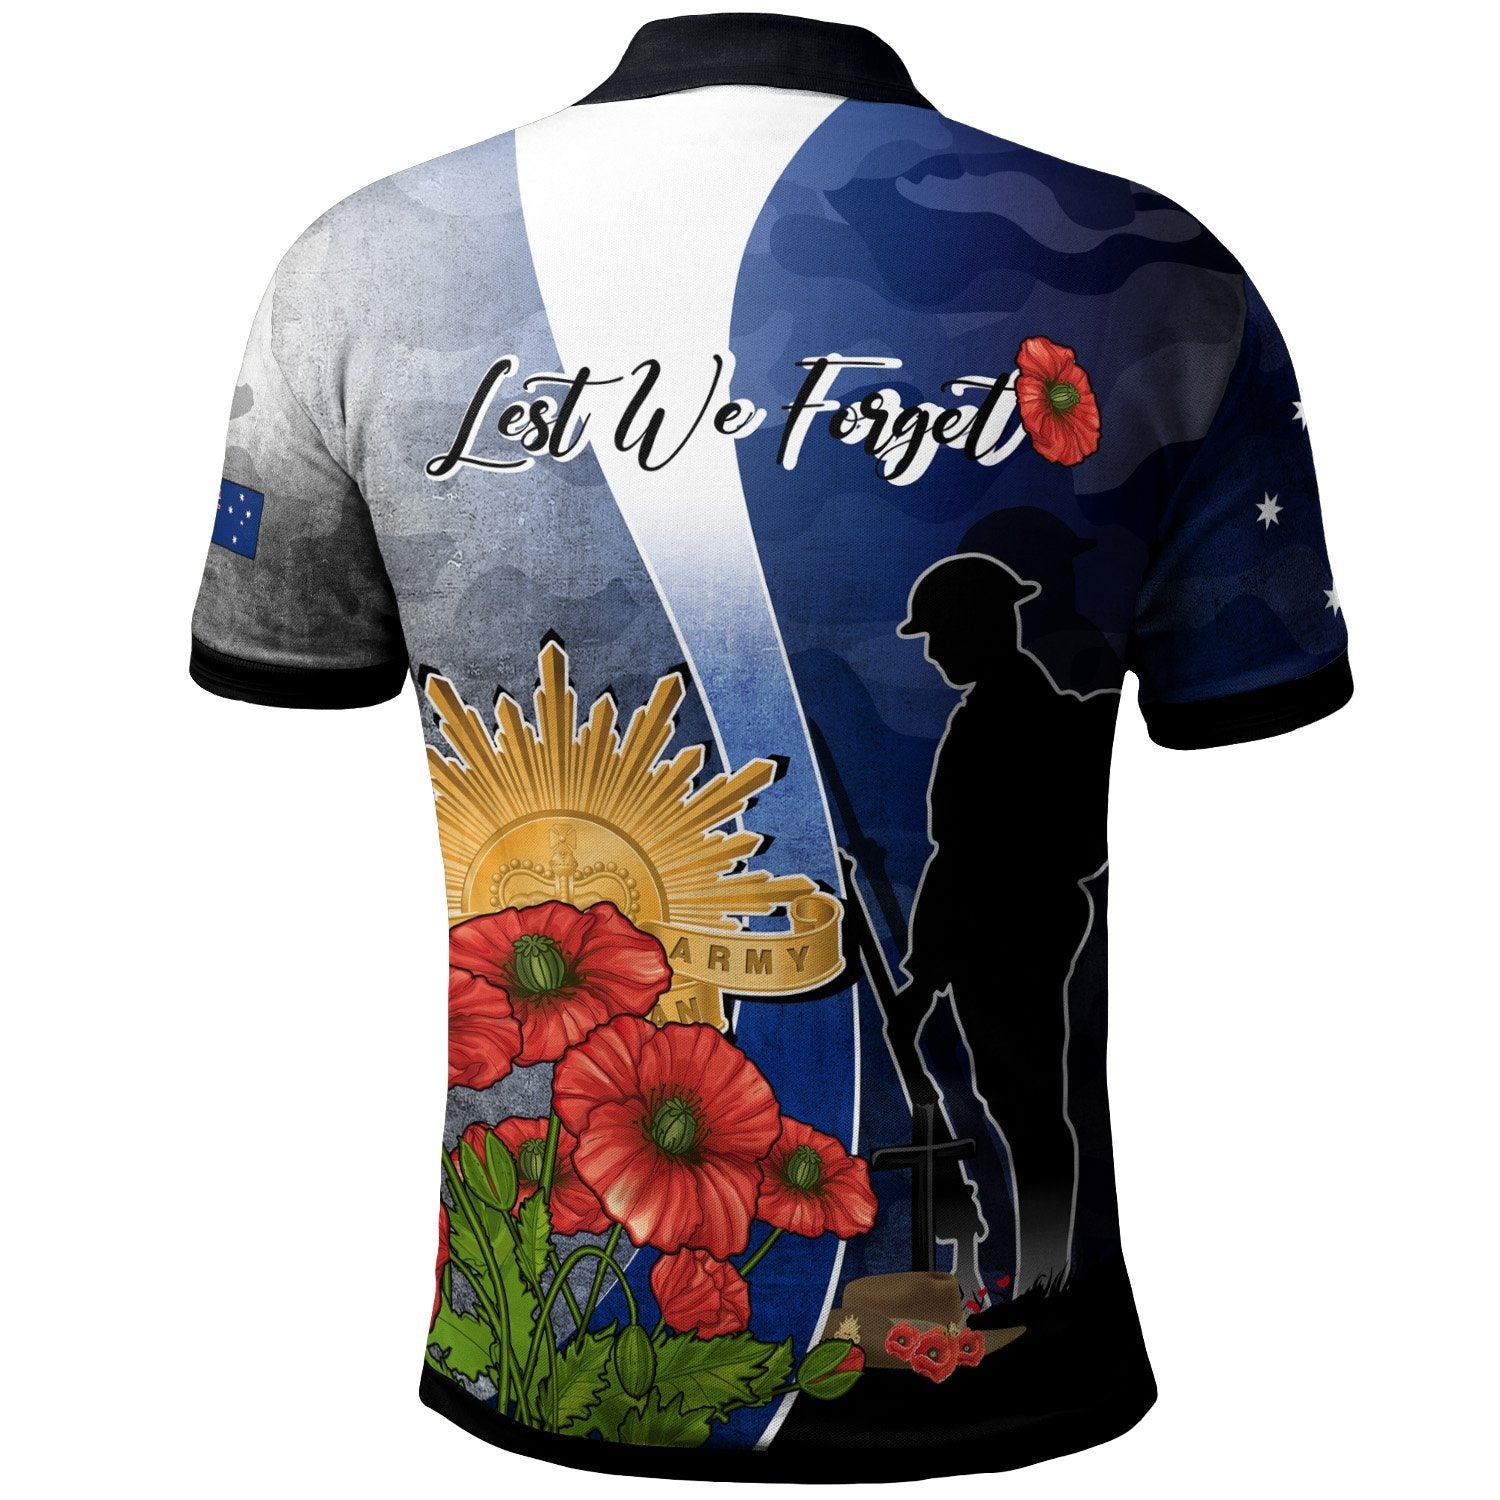 anzac-day-polo-shirt-lest-we-forget-poppy-flower